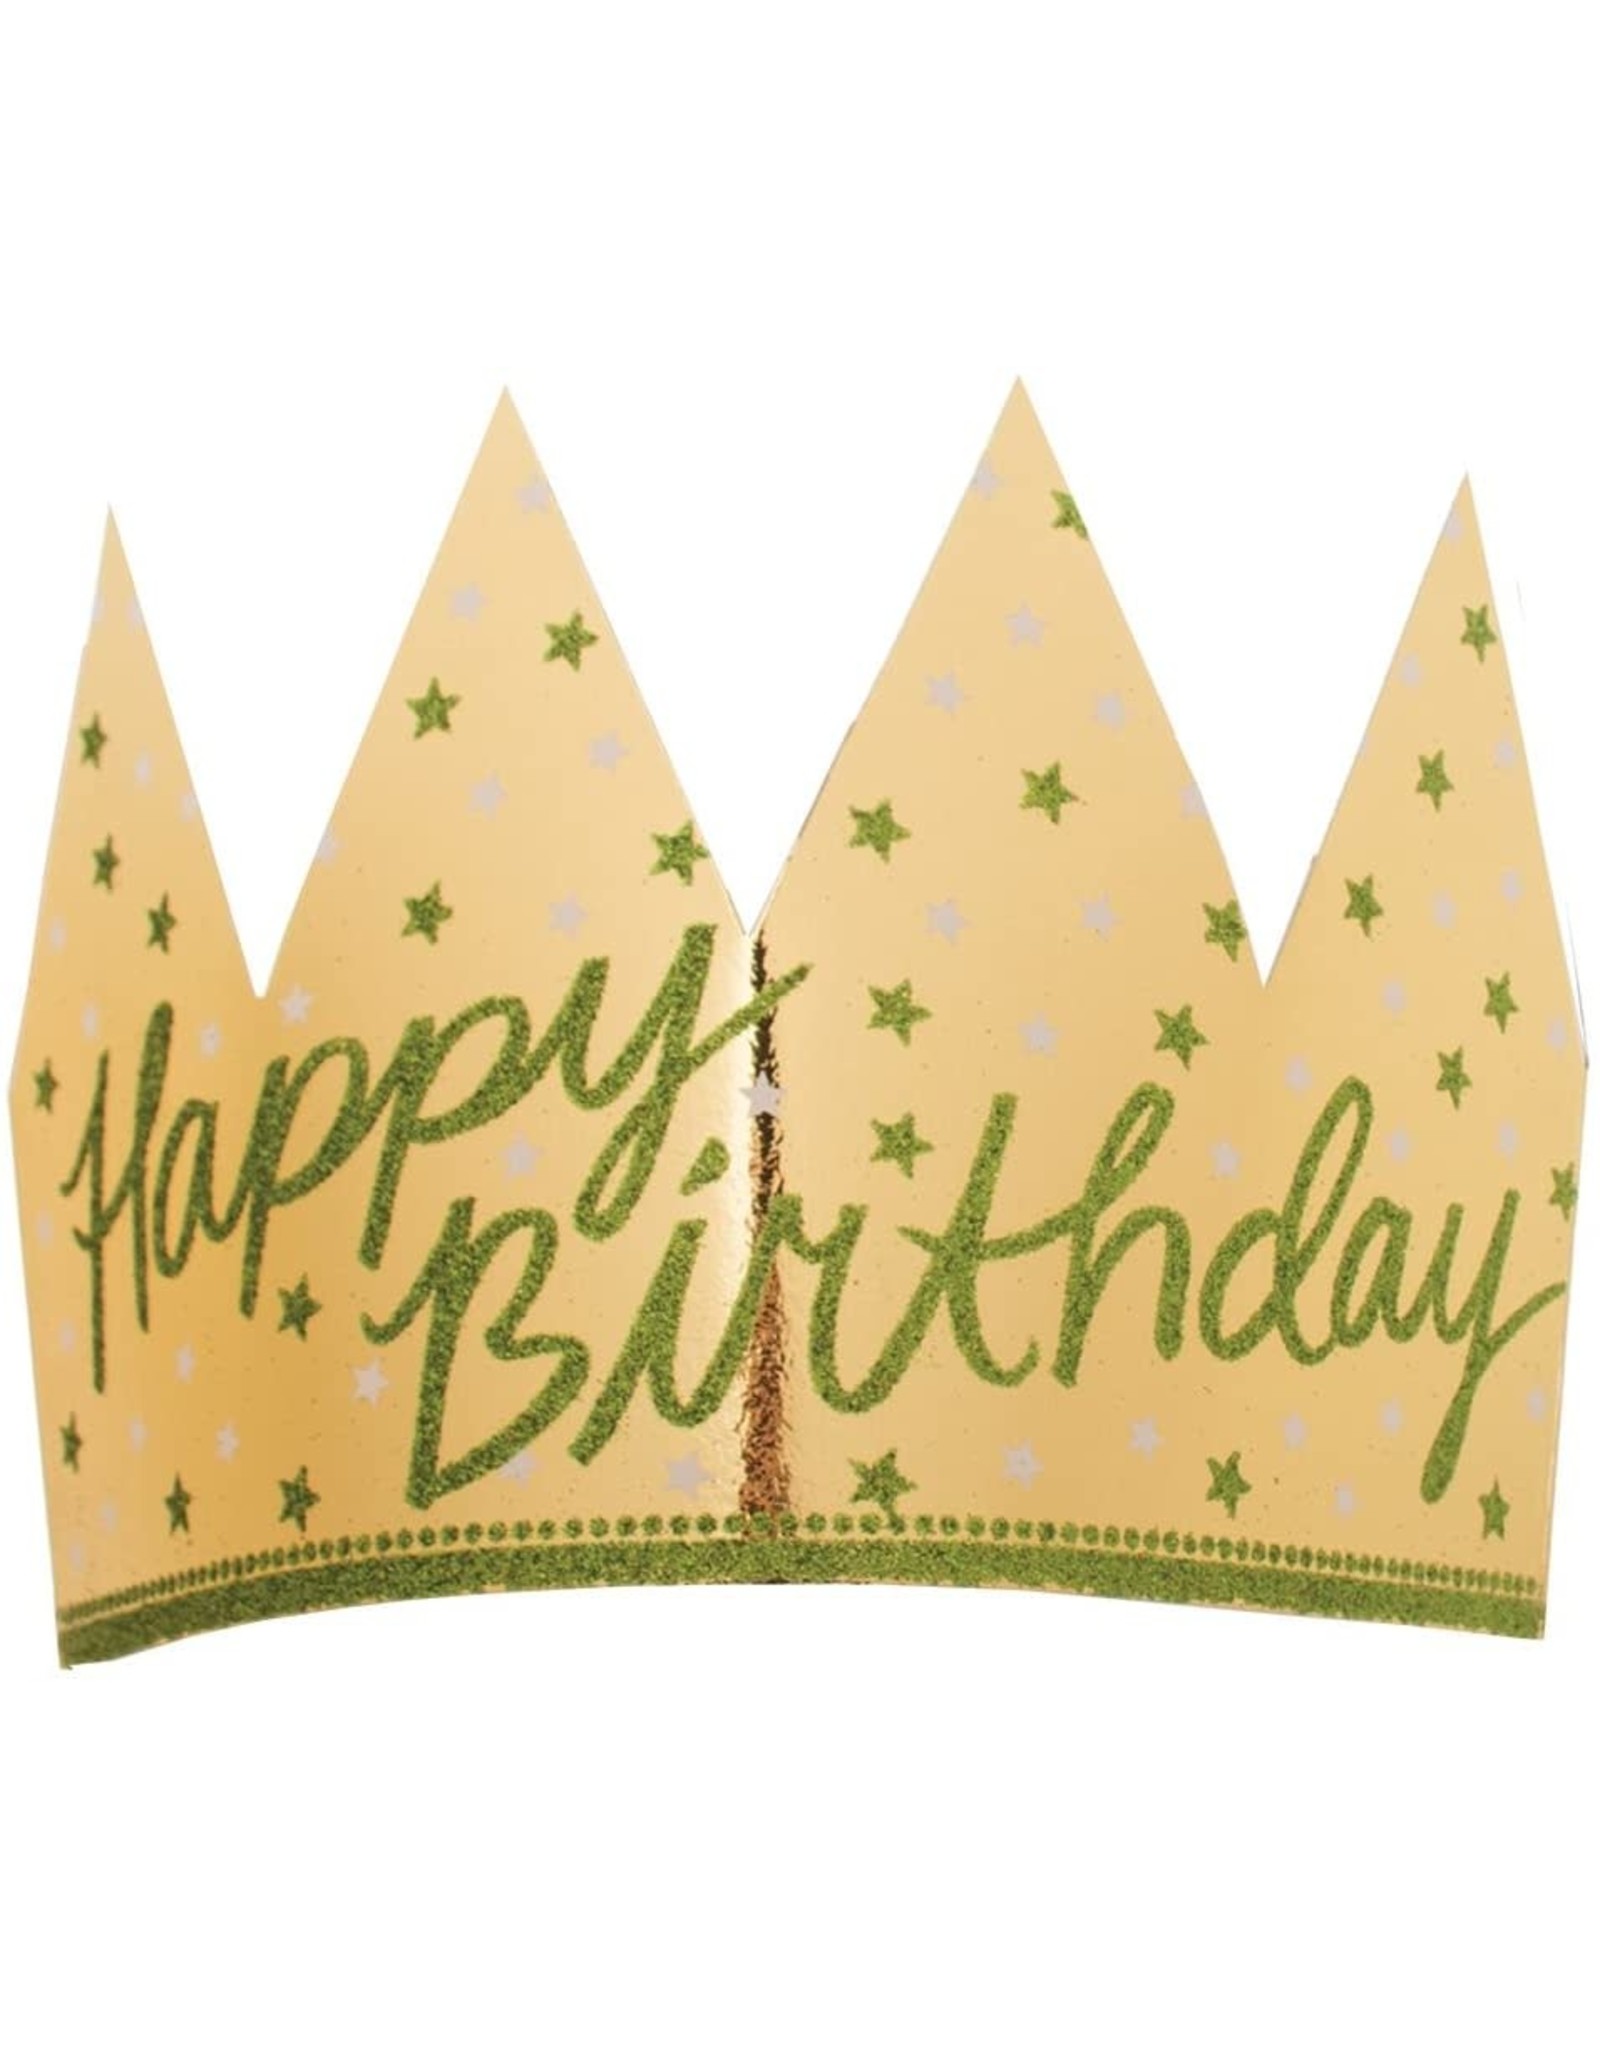 Gold Foil Glittered Happy Birthday Crowns 6pk